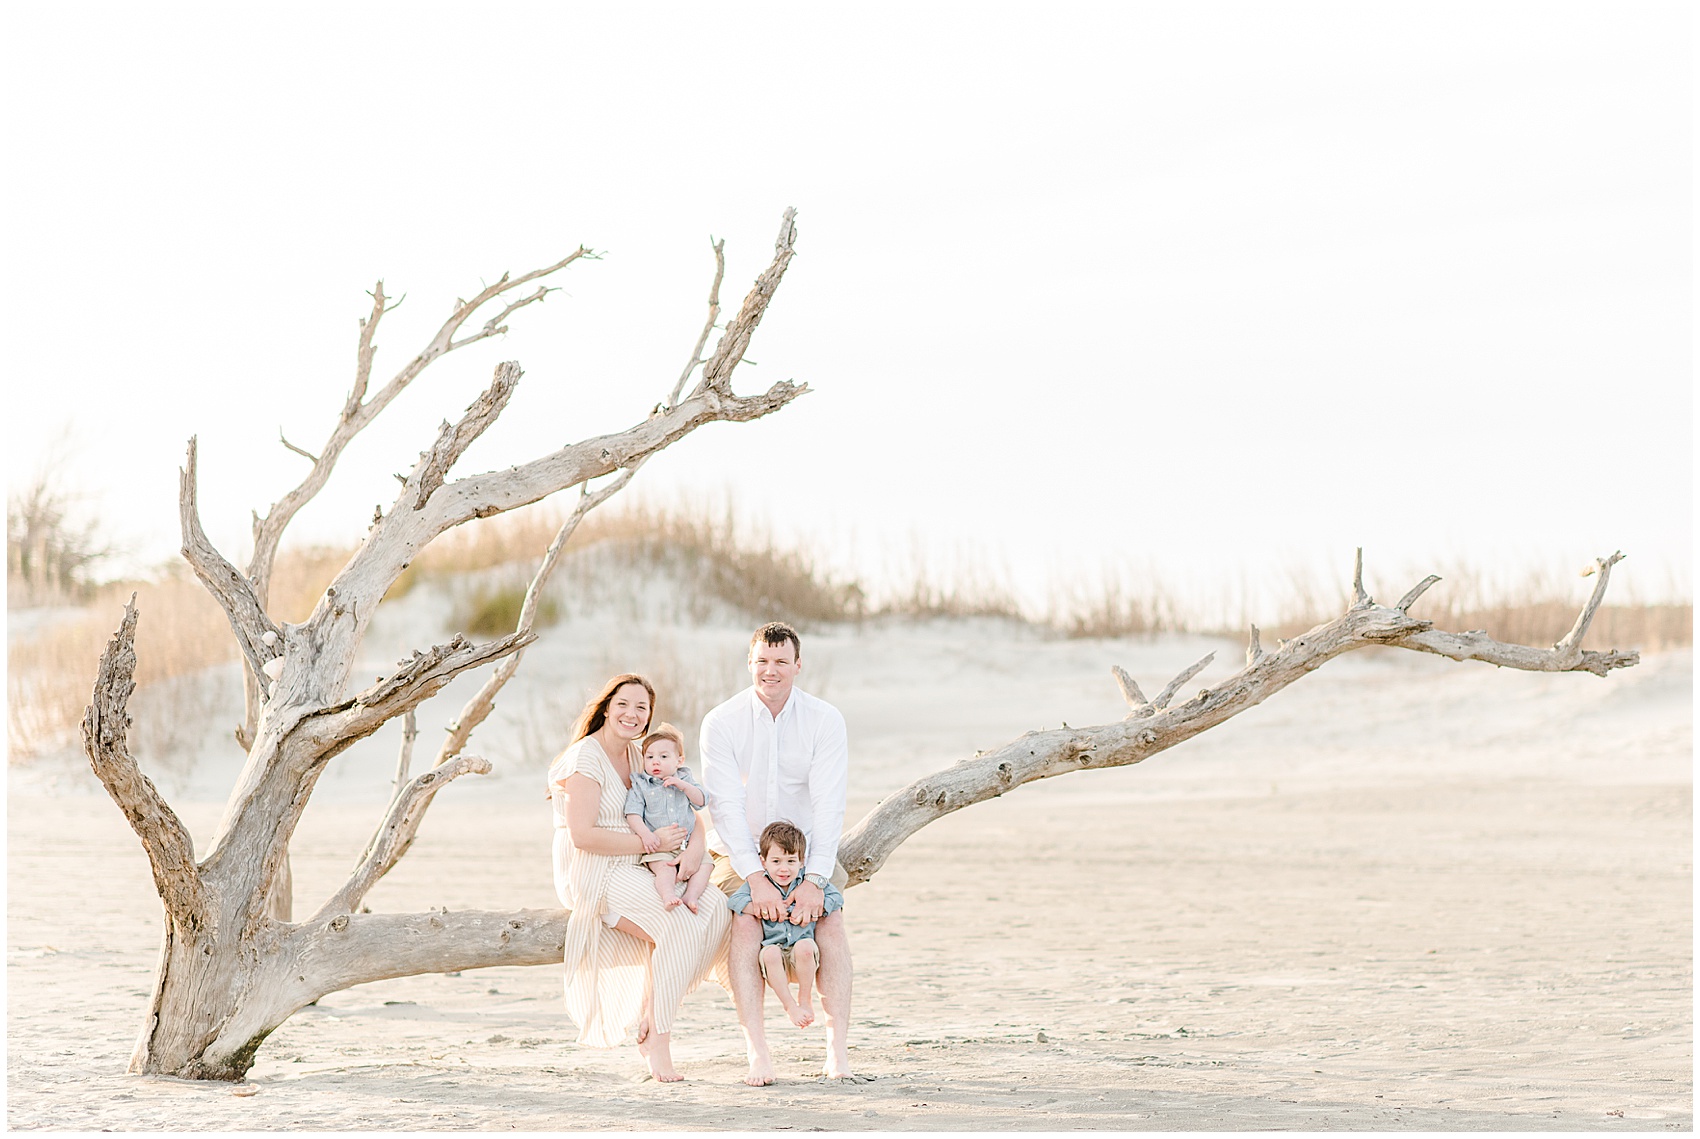 south of broad downtown Charlestion Folly Beach charleston wedding photographer session Lowcountry Charleston SC wedding Photographer_1978.jpg